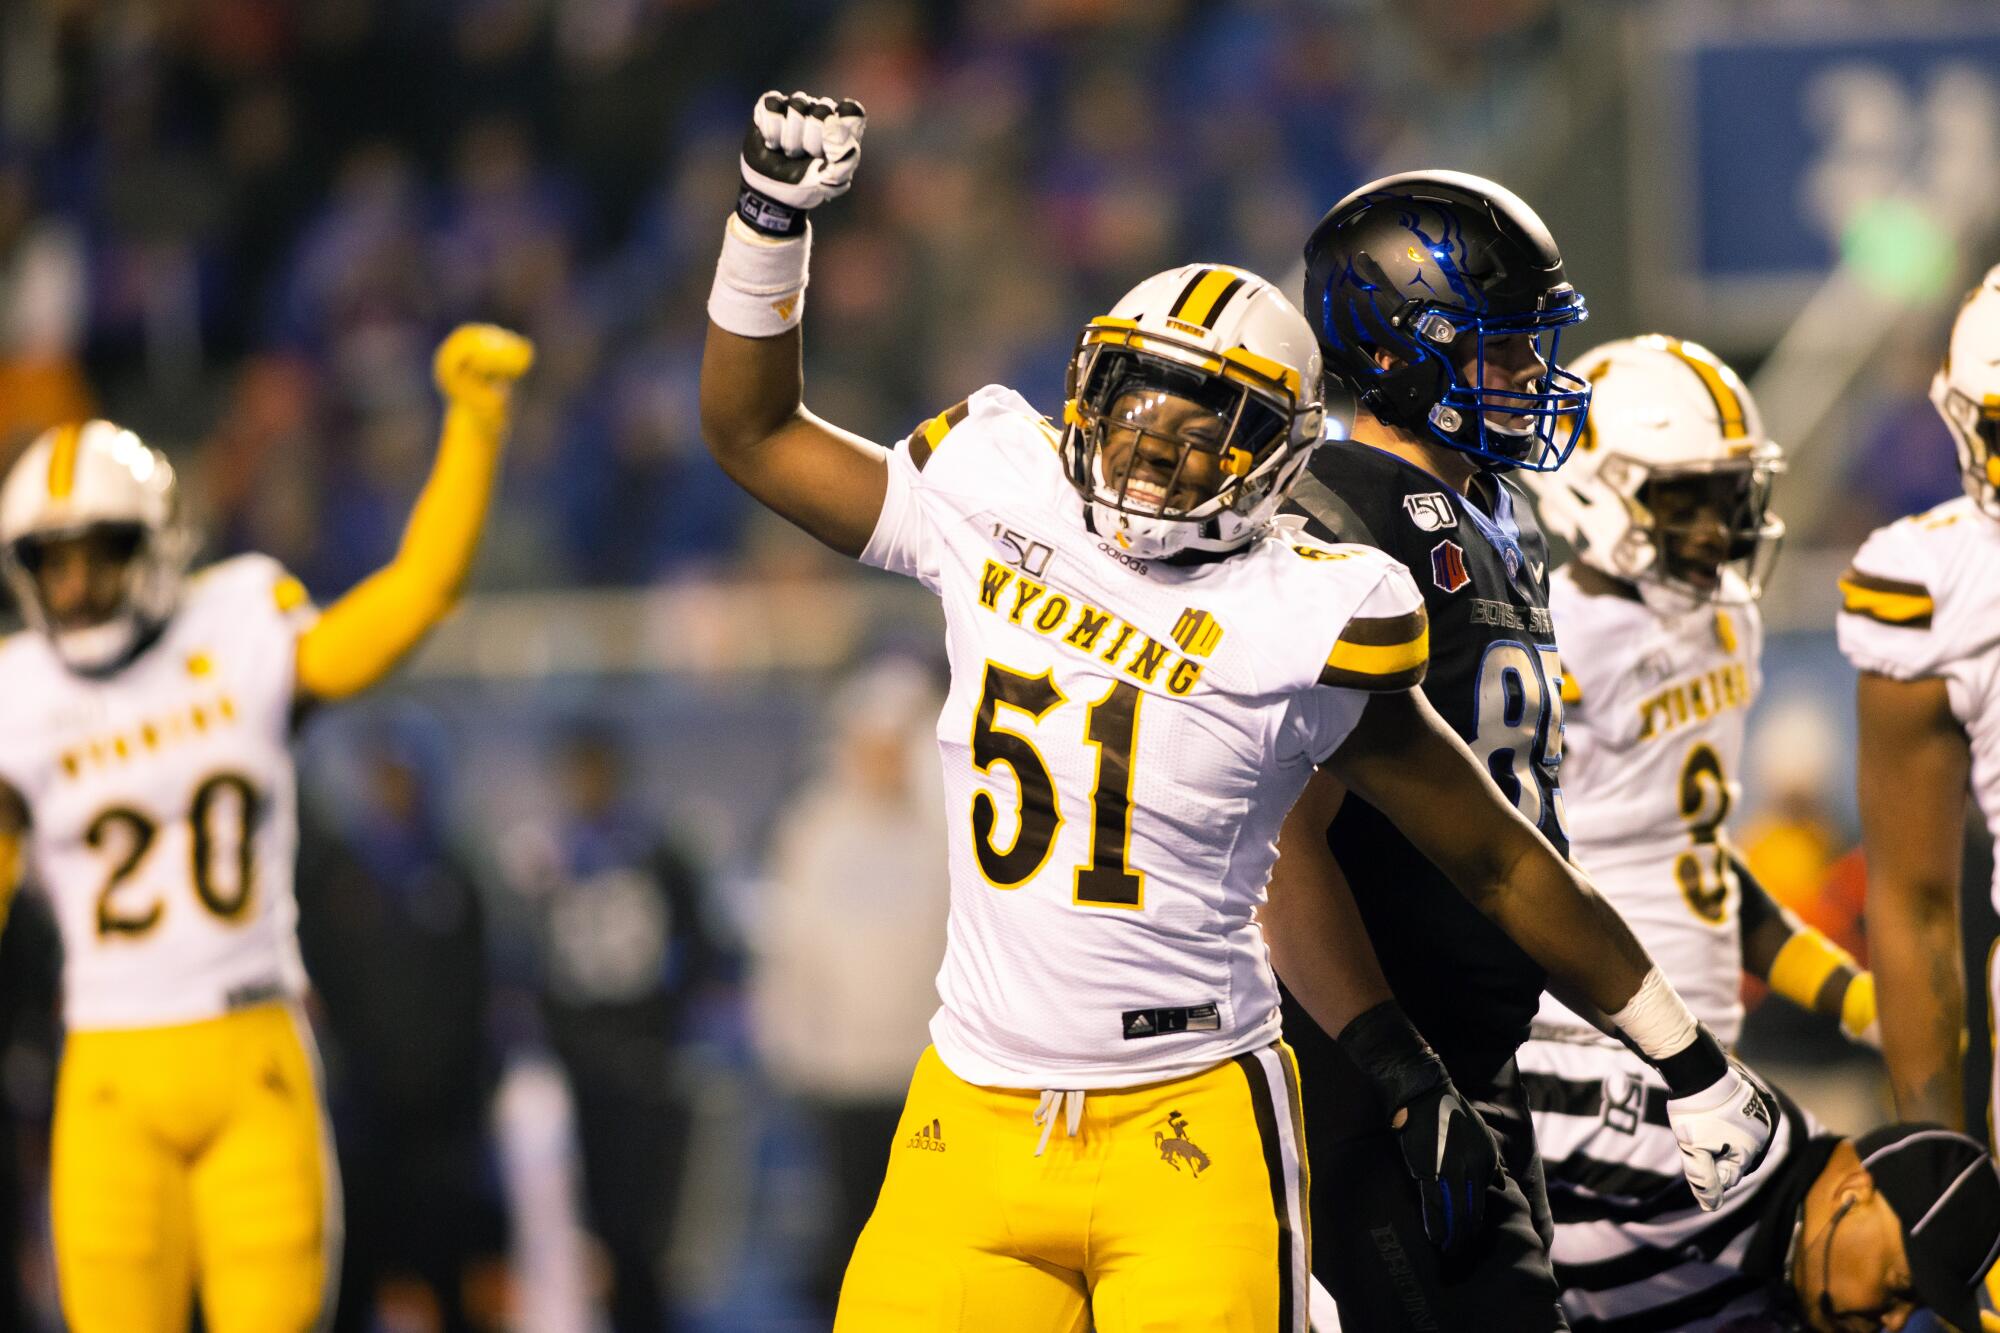 Solomon Byrd celebrates after a big play between Wyoming and Boise State during a game in November 2019.